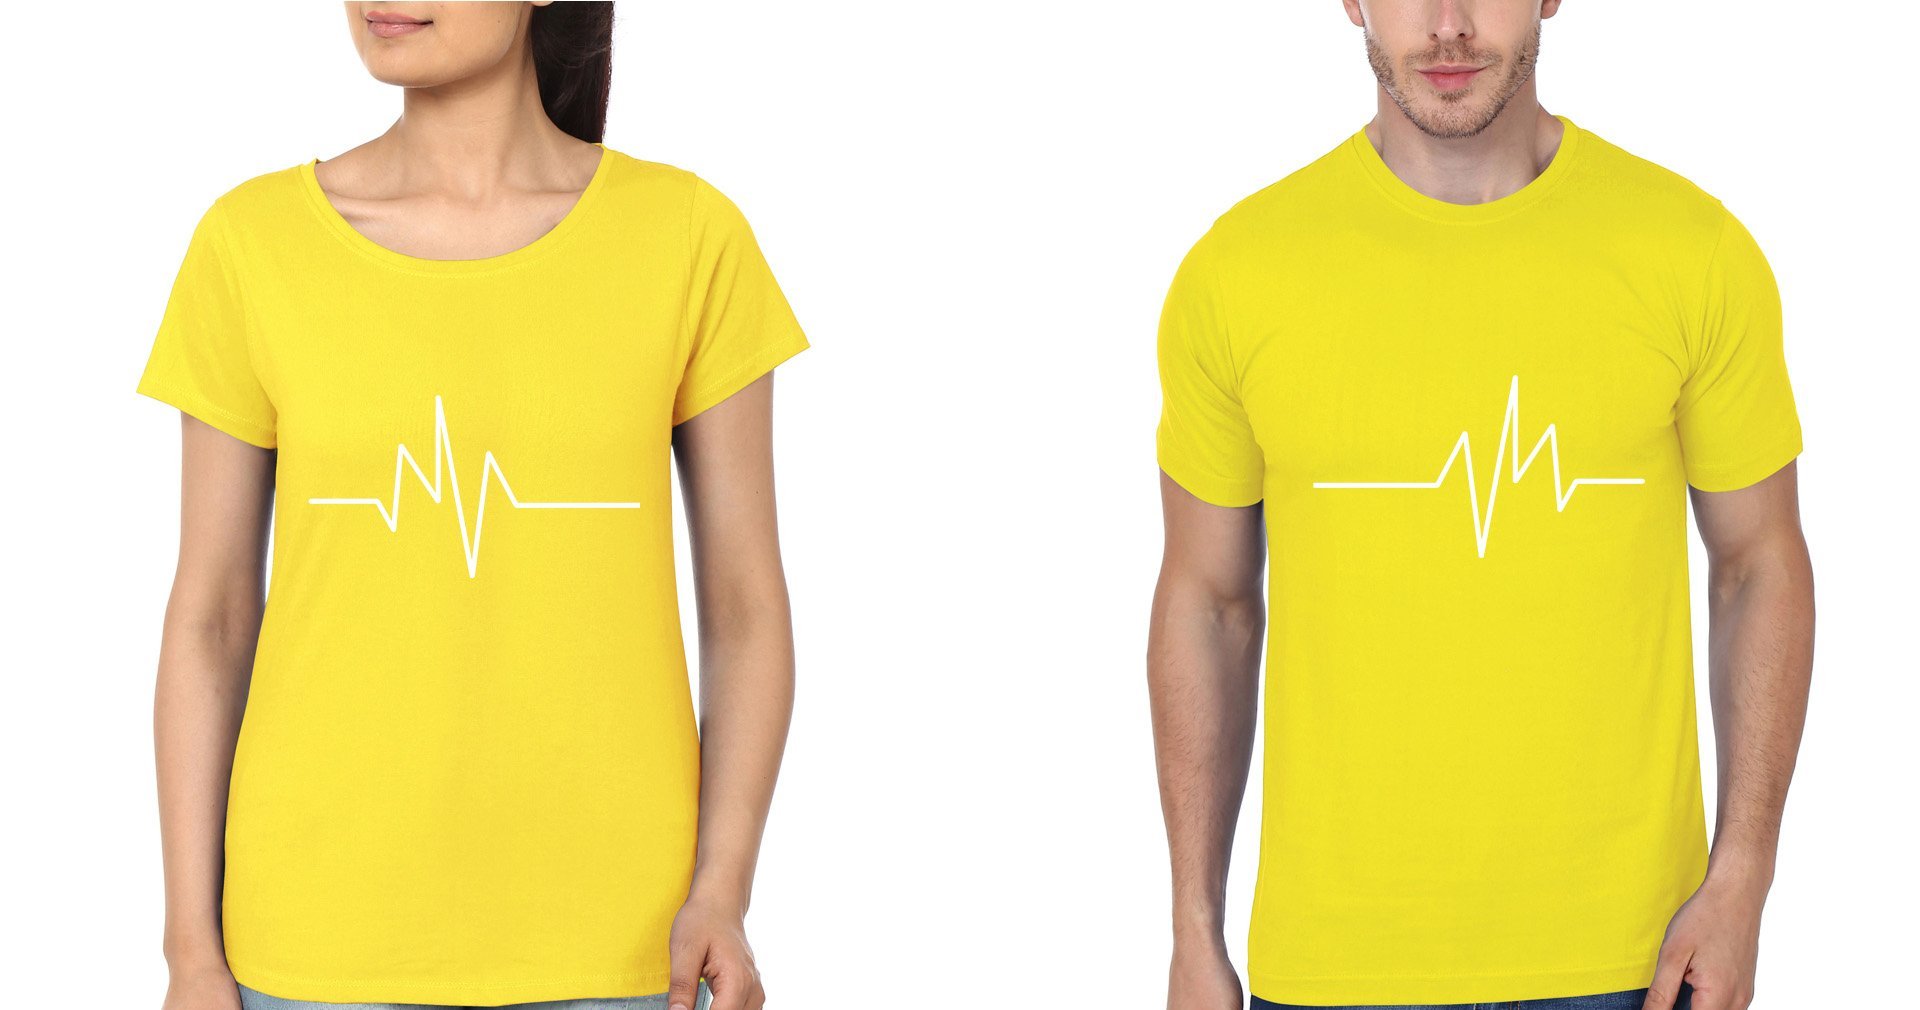 HEARTBEAT Brother and Sister Matching T-Shirts- FunkyTradition - FunkyTradition